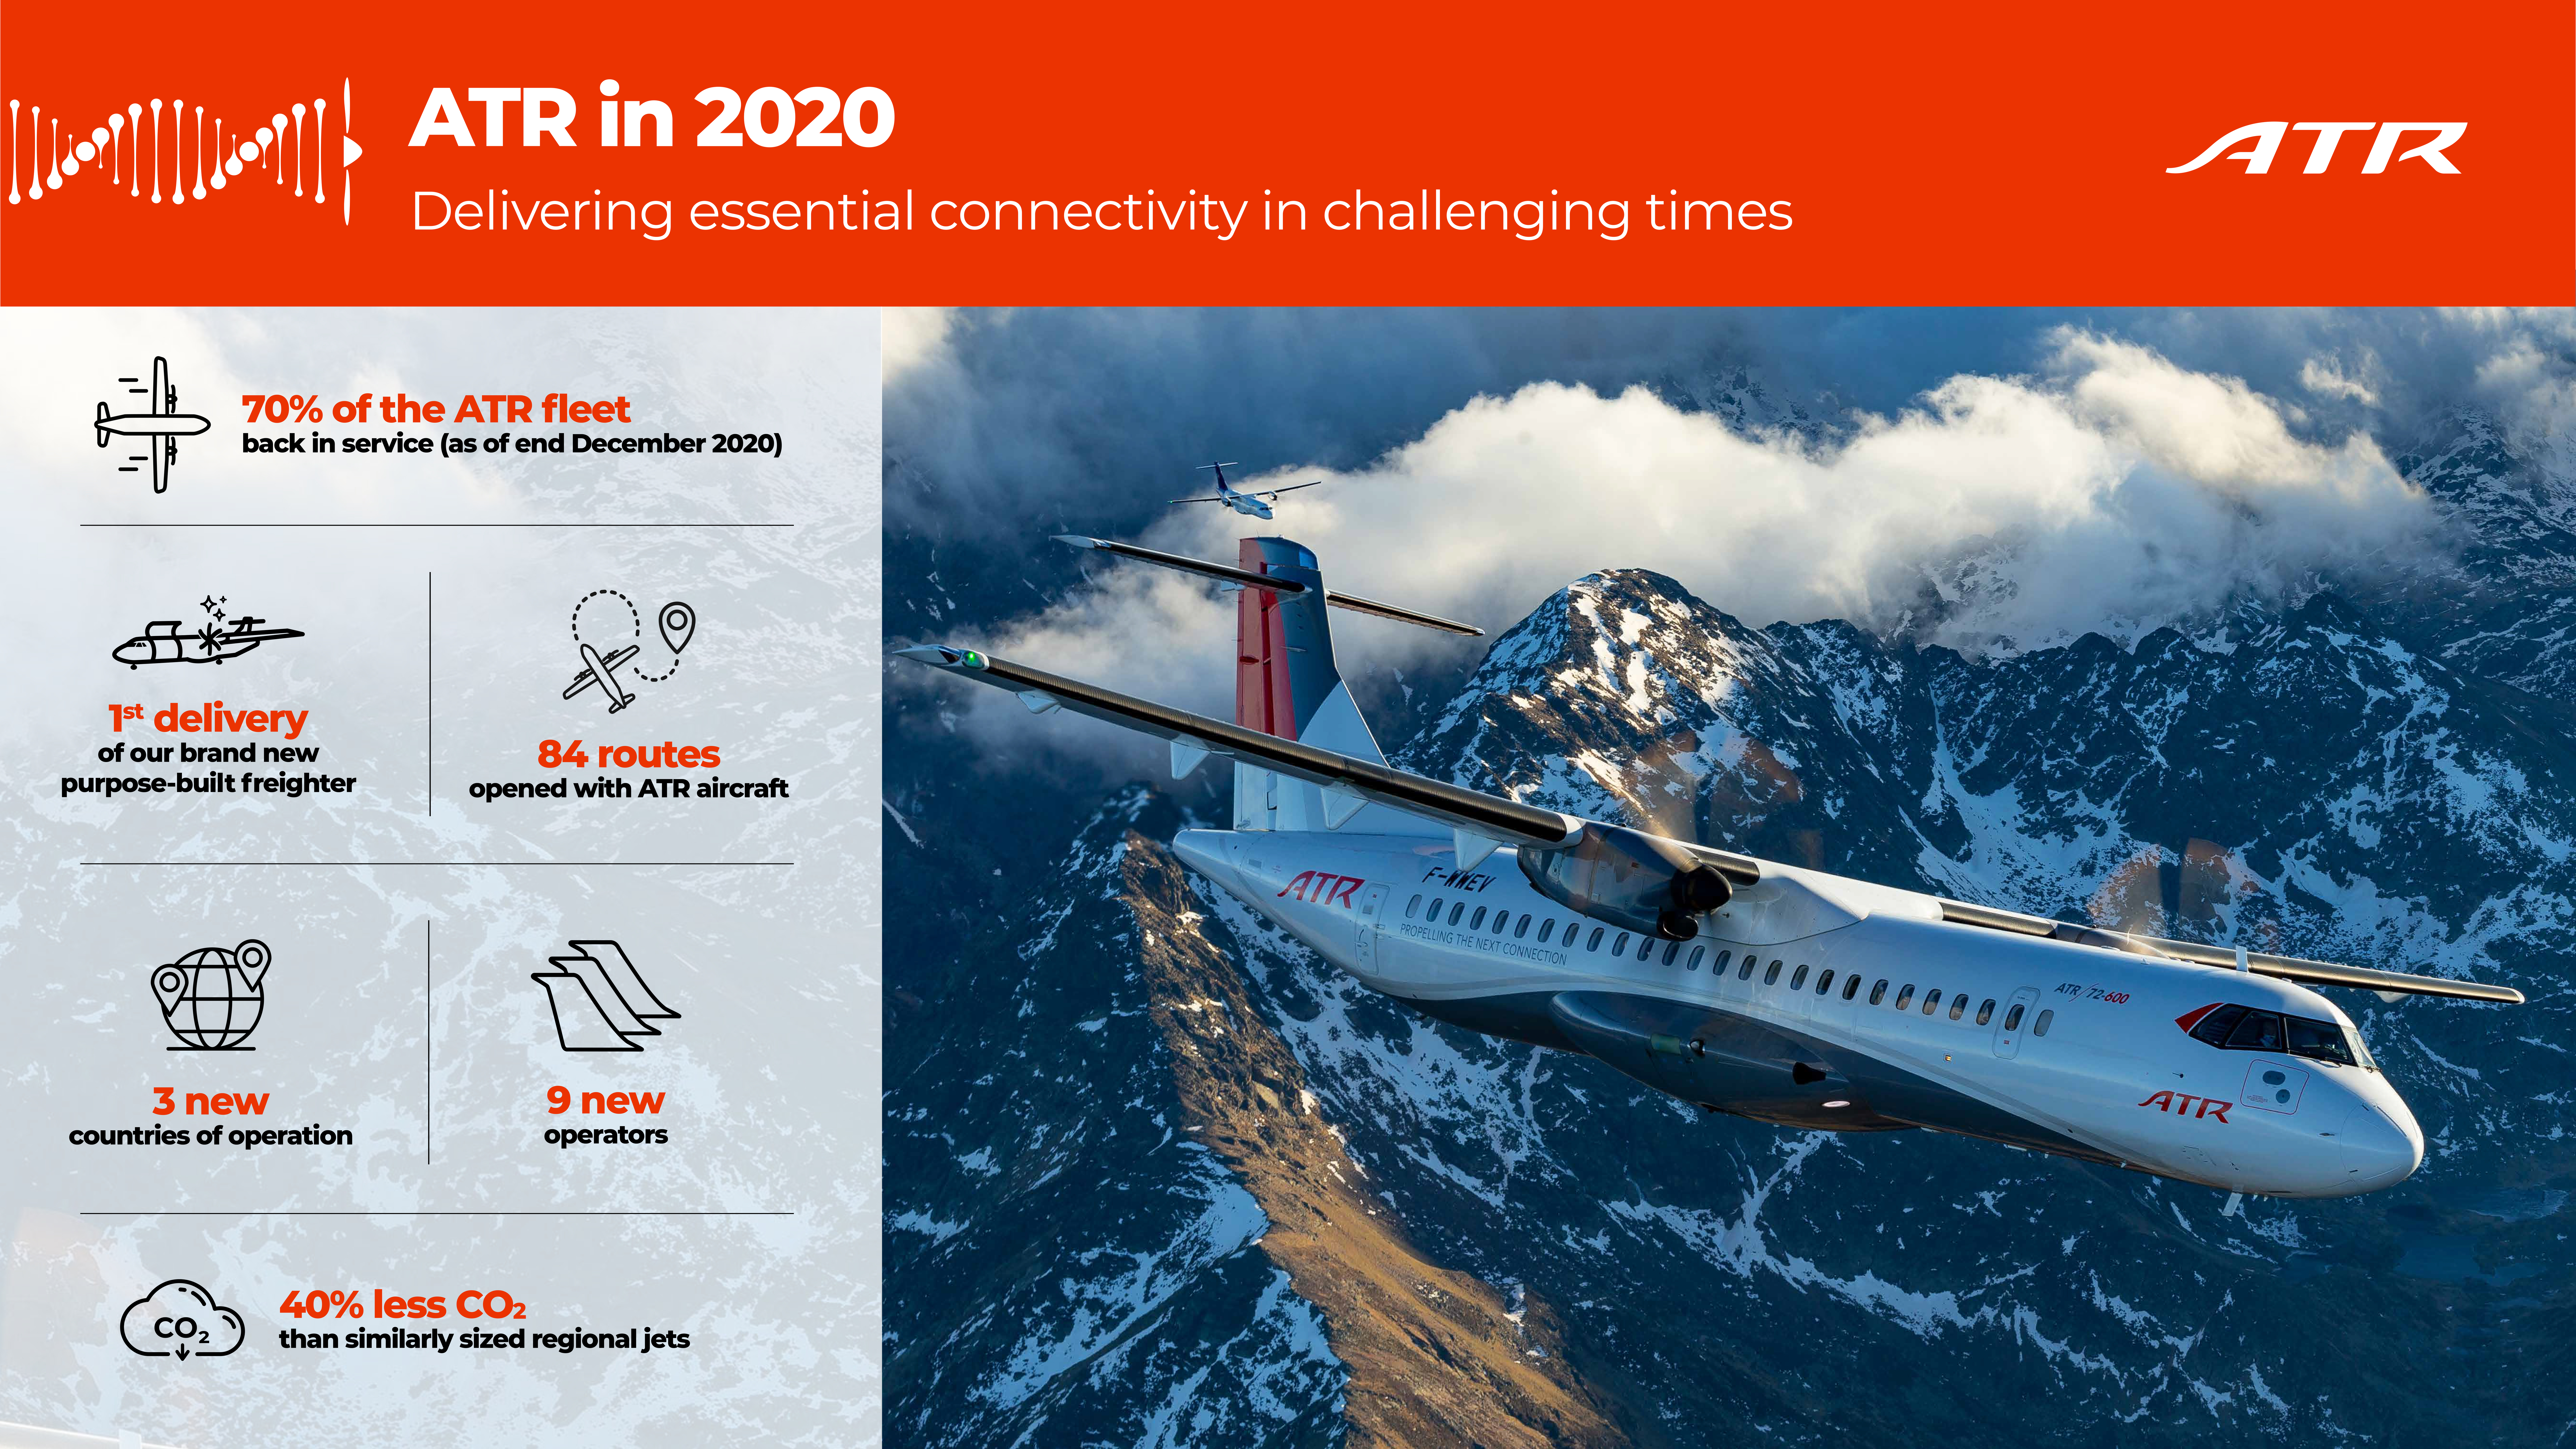 ATR in 2020 - Delivering essential connectivity in challenging times 